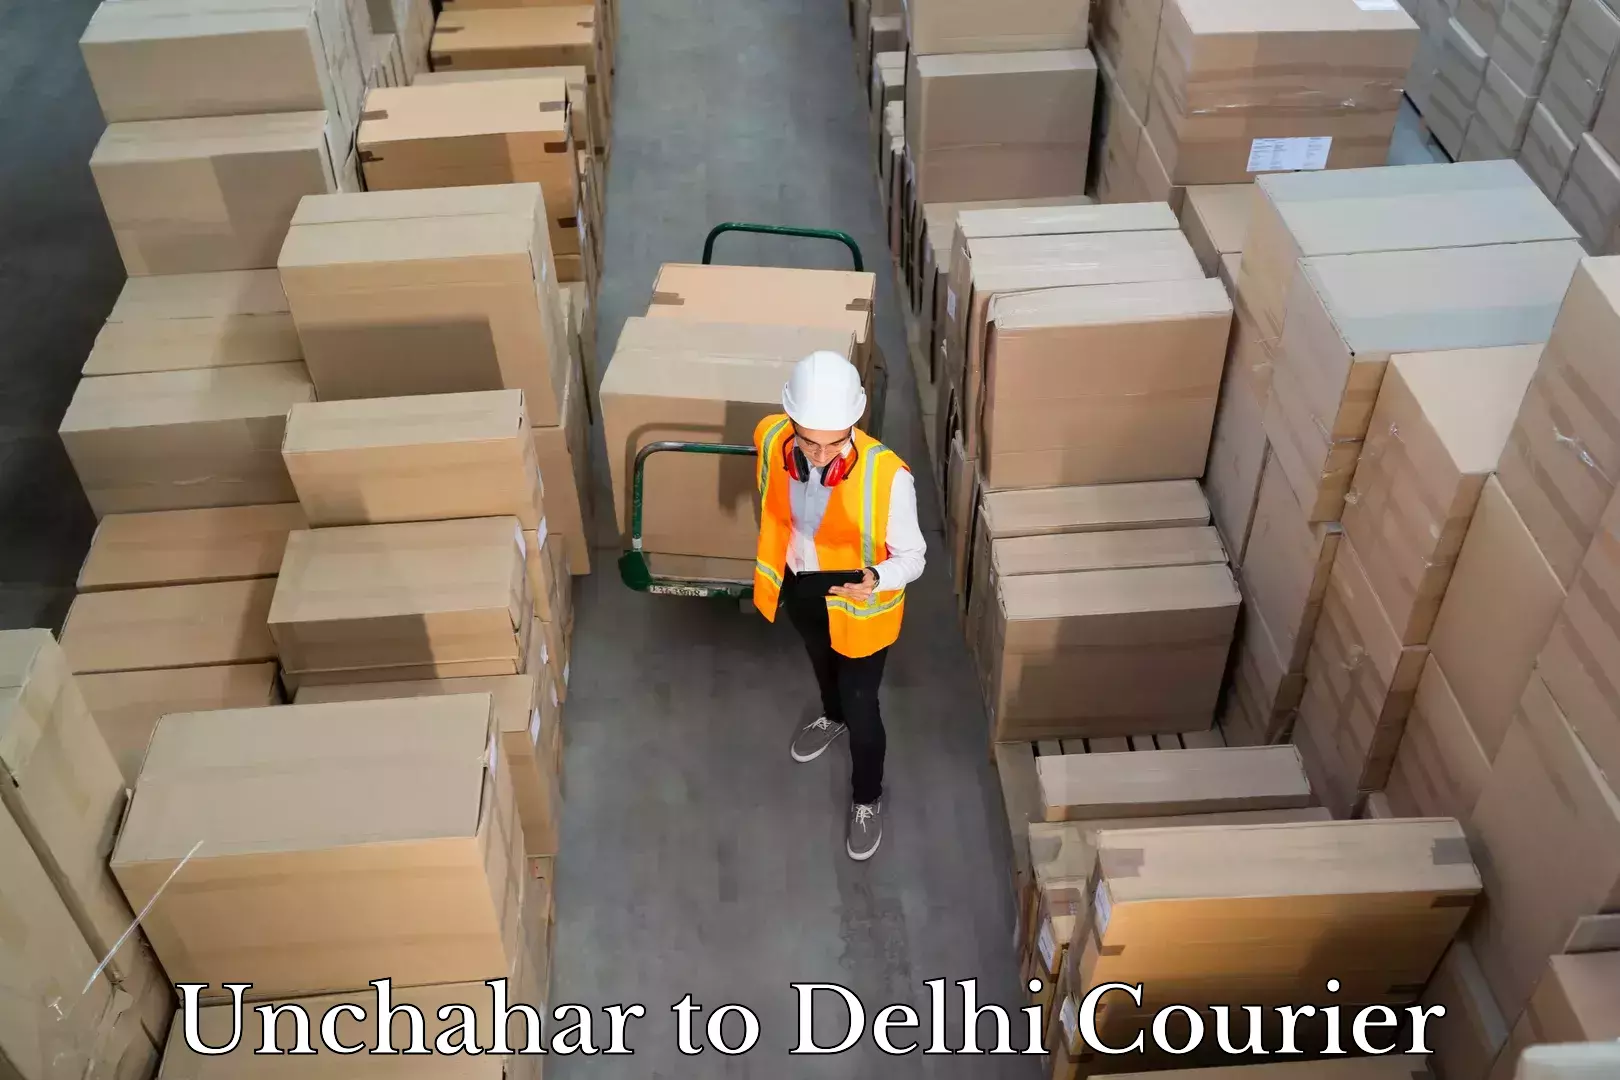 Baggage transport logistics Unchahar to NCR